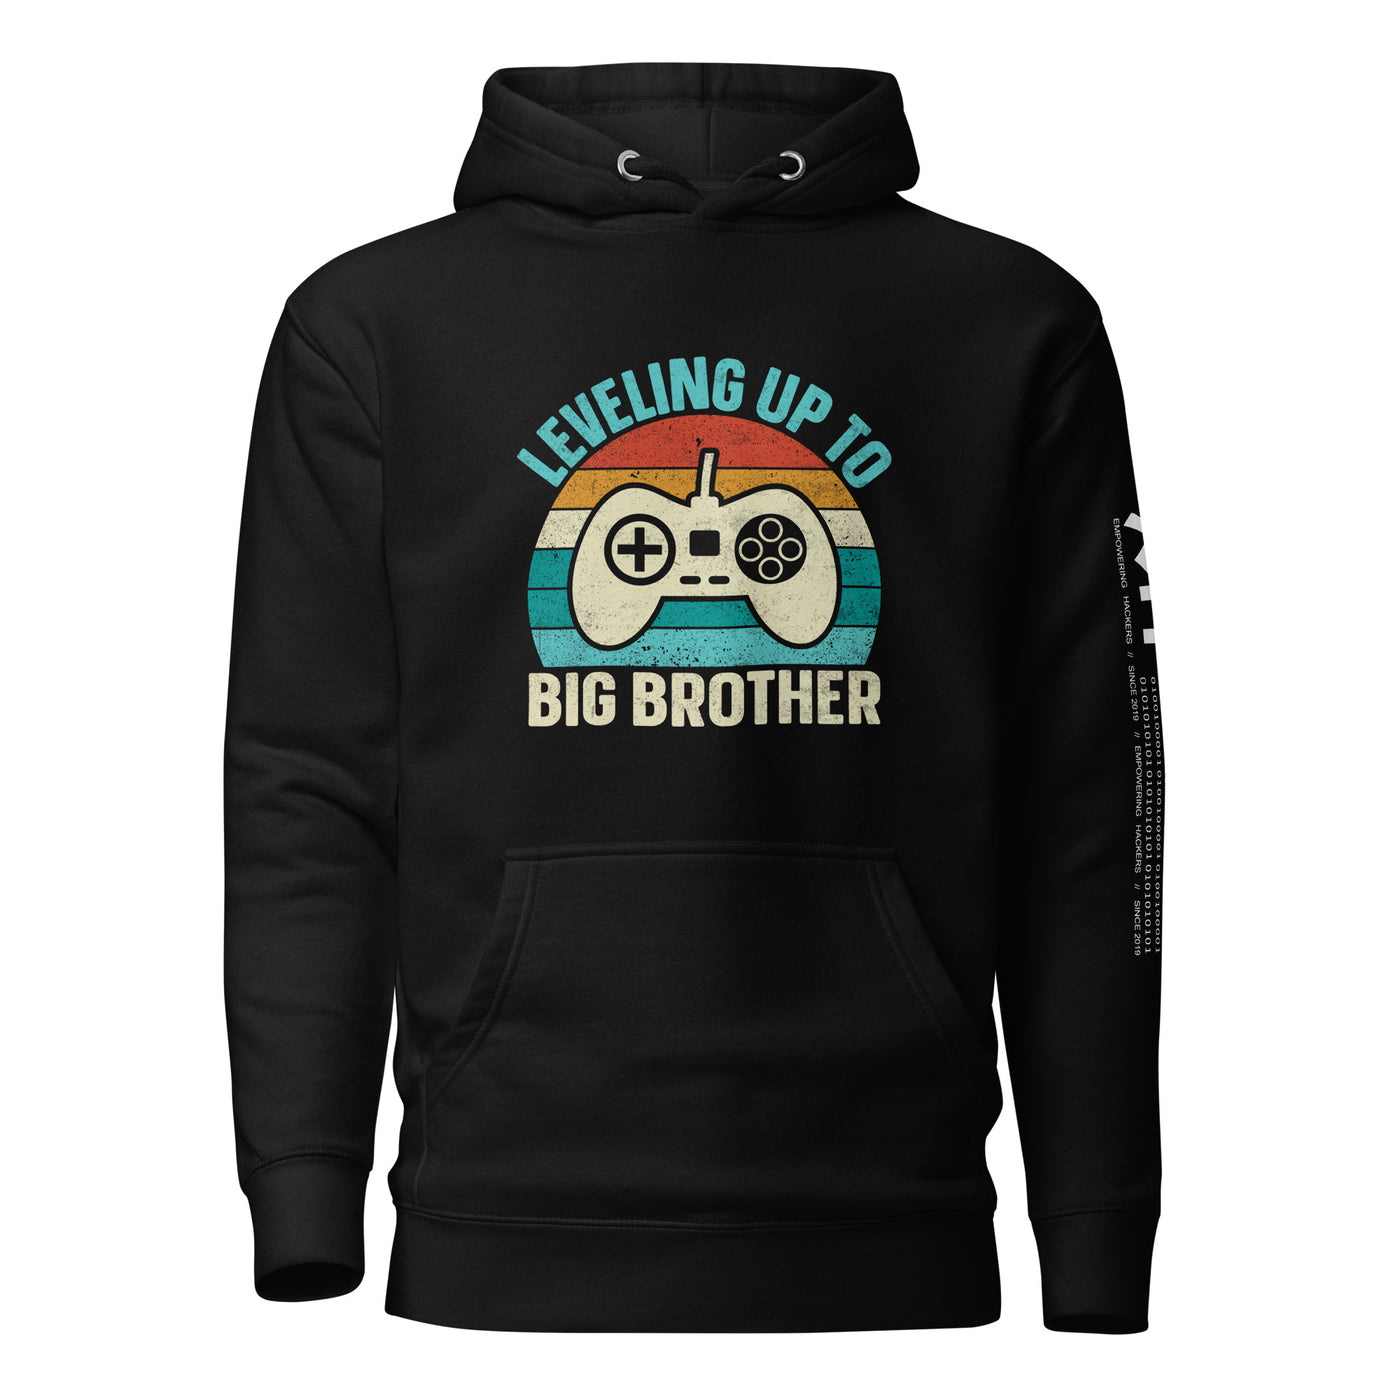 Levelling up to Big Brother V2 - Unisex Hoodie